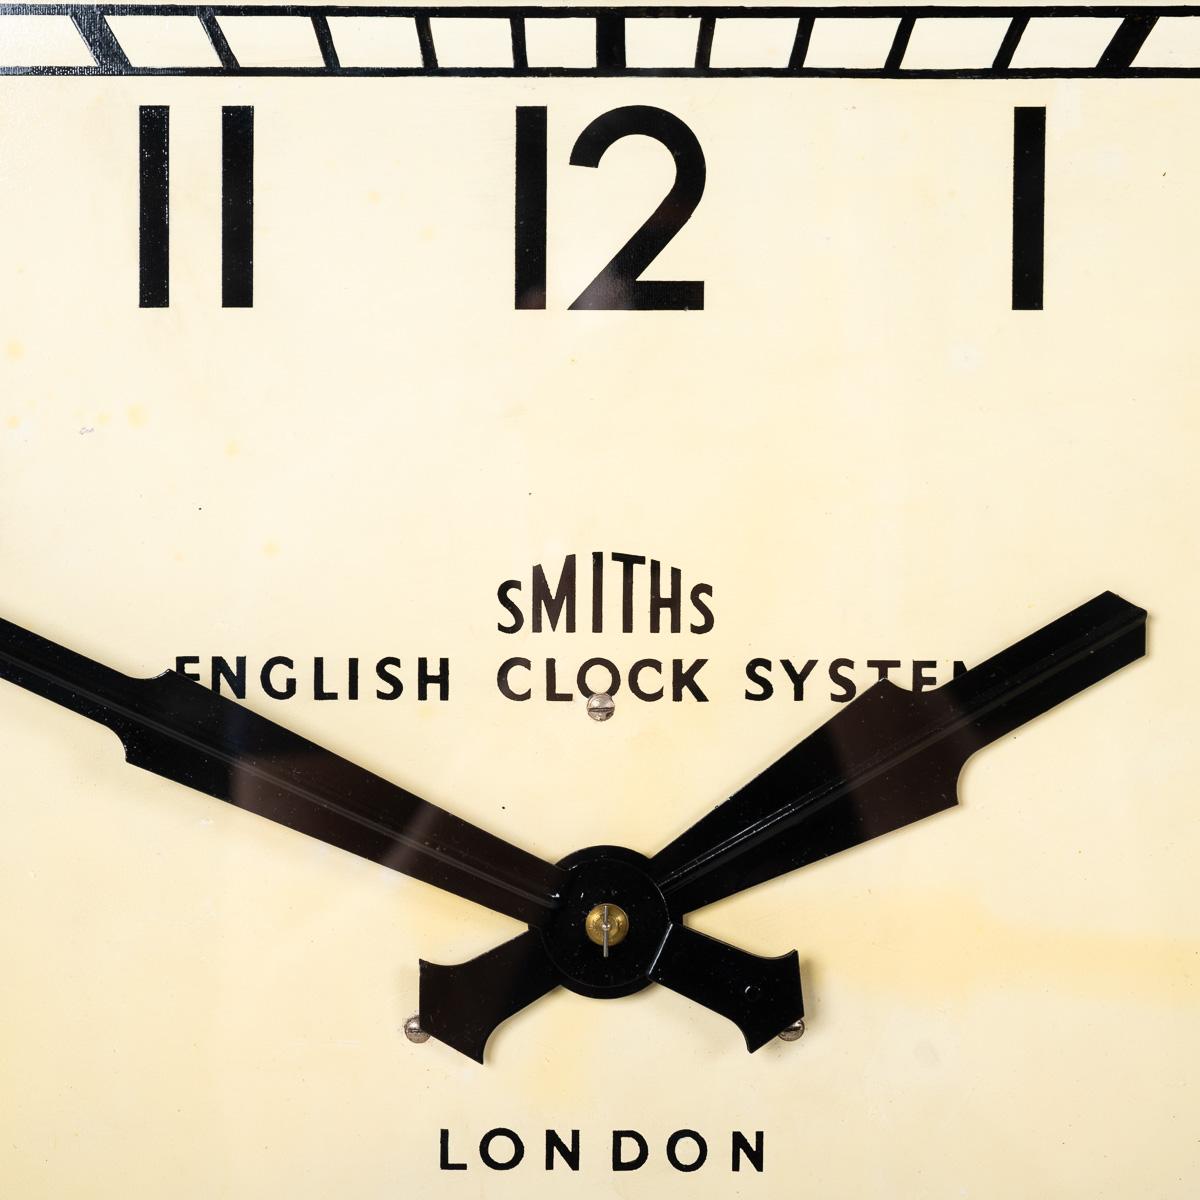 Industrial Large Antique Square Factory Wall Clock by Smiths English Clock Systems